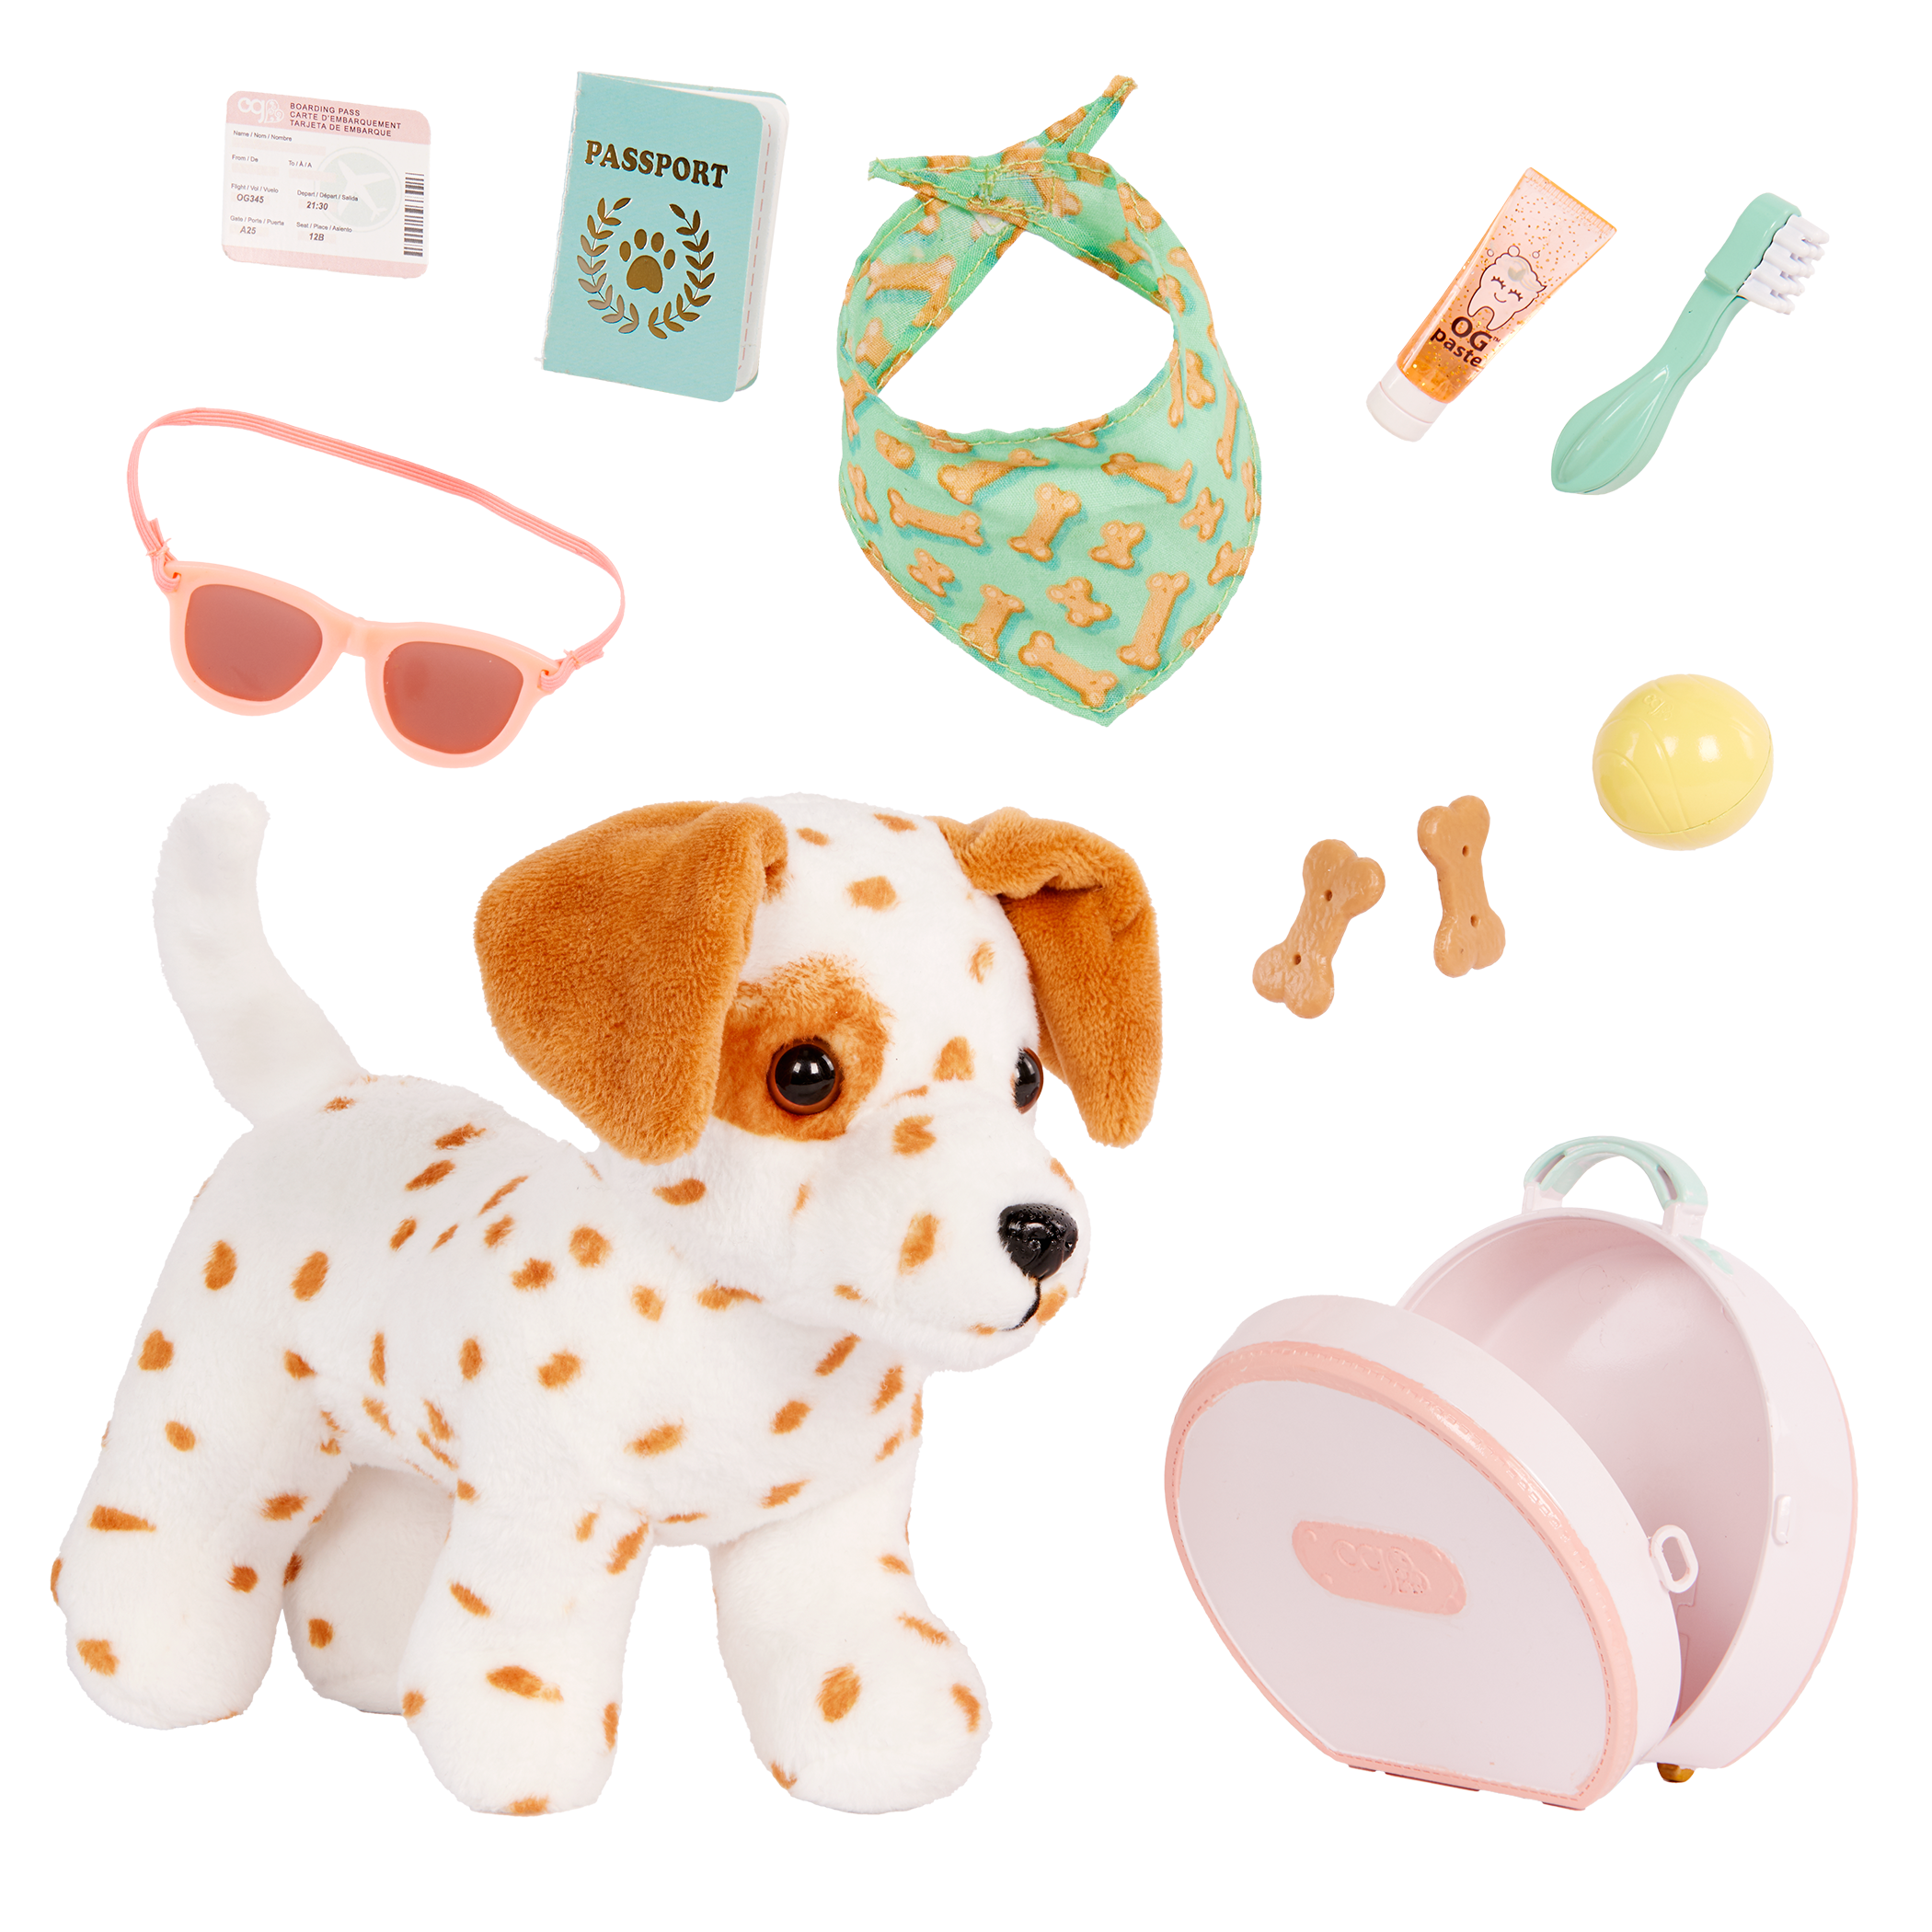 Our Generation Vacay Poseable Dalmatian Plush Dog and accessories including passport, sunglasses, travel items and carry case for accessories 